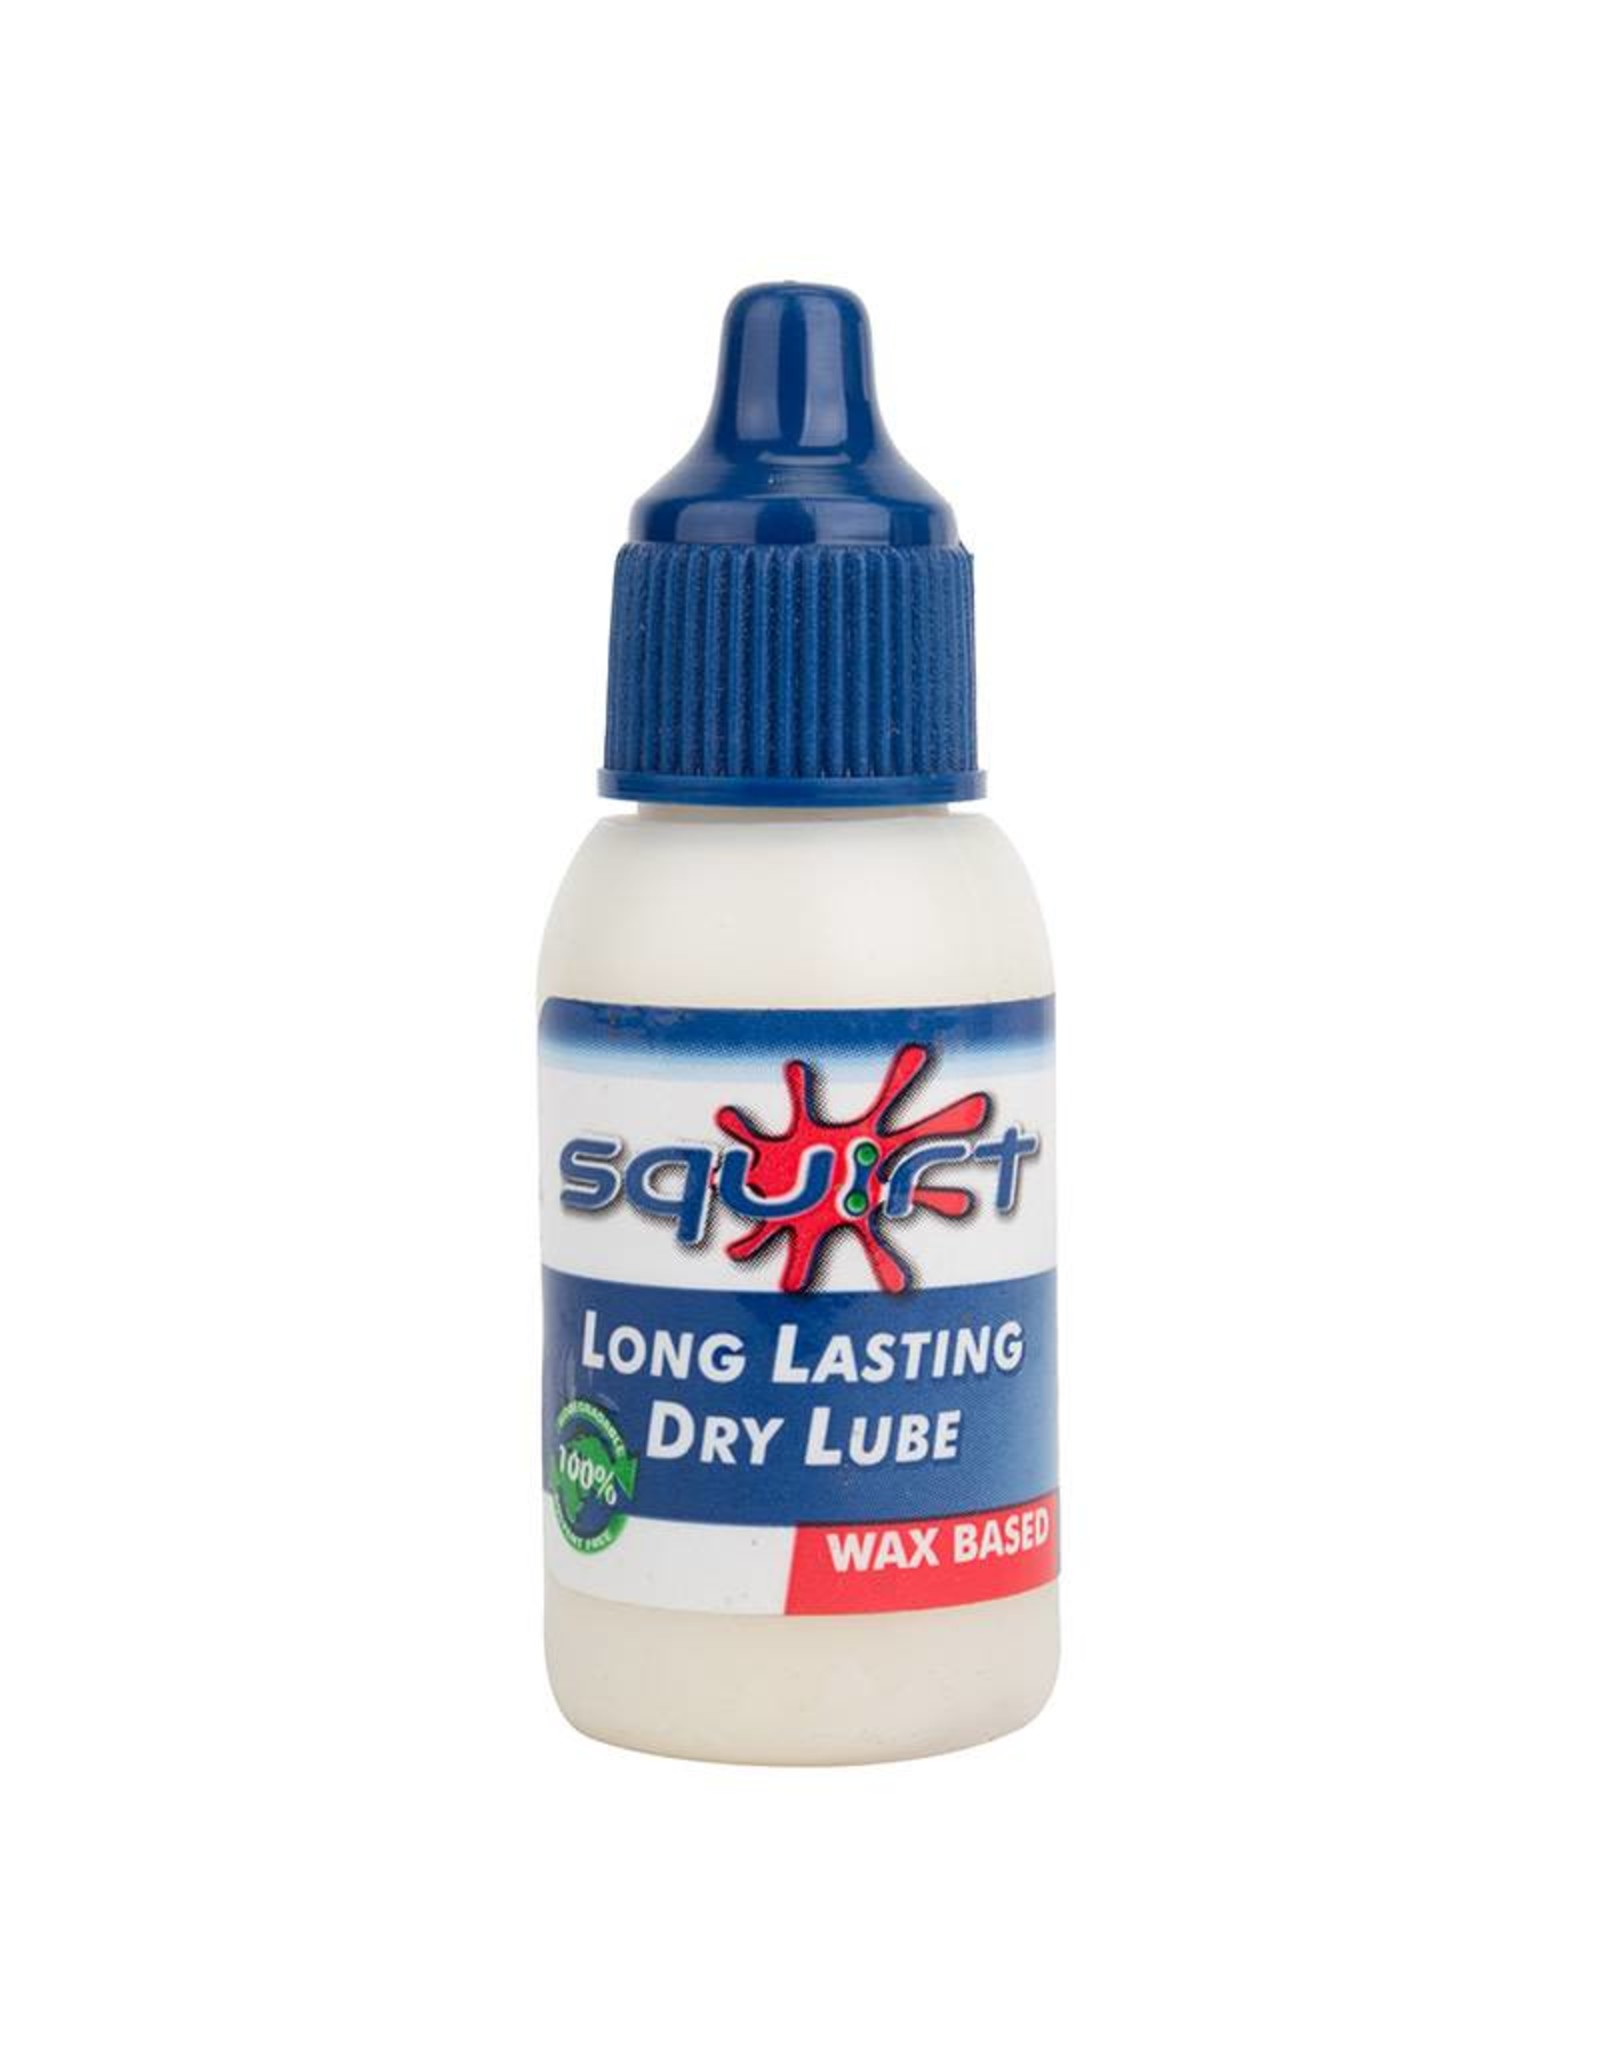 LUBE SQUIRT DRY LUBE 0.5oz